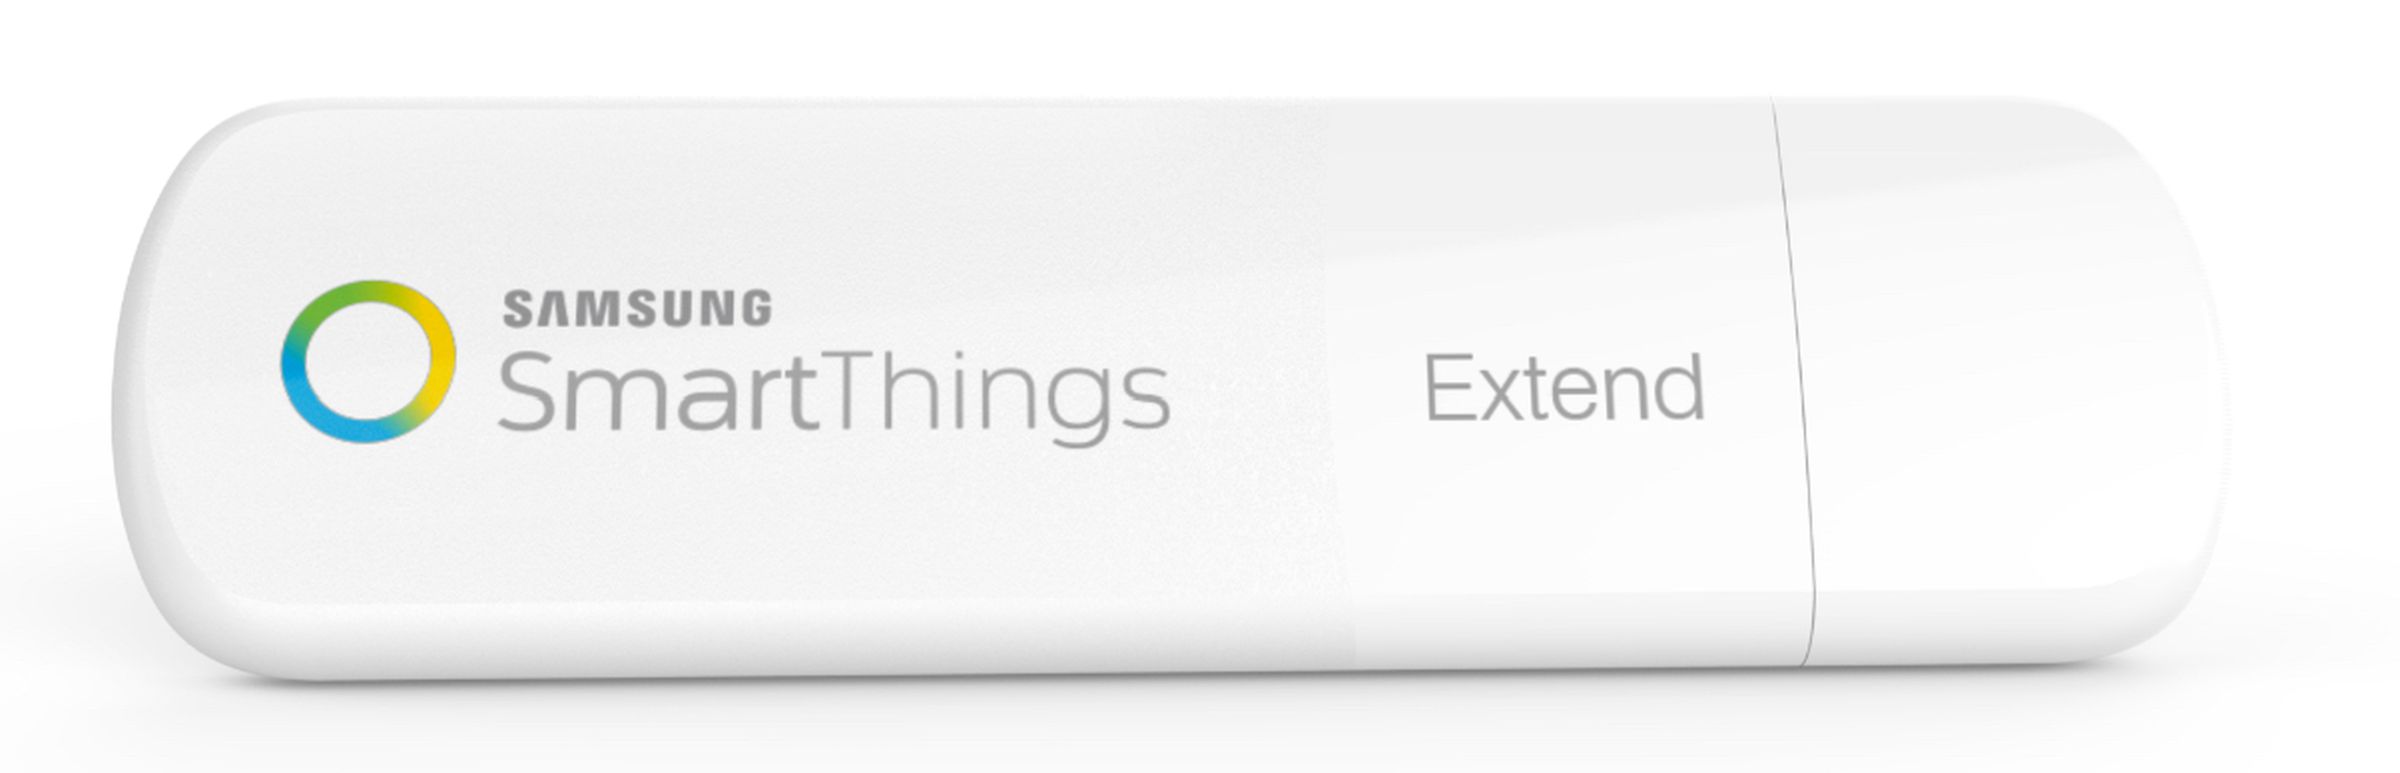 samsung smarthings extend